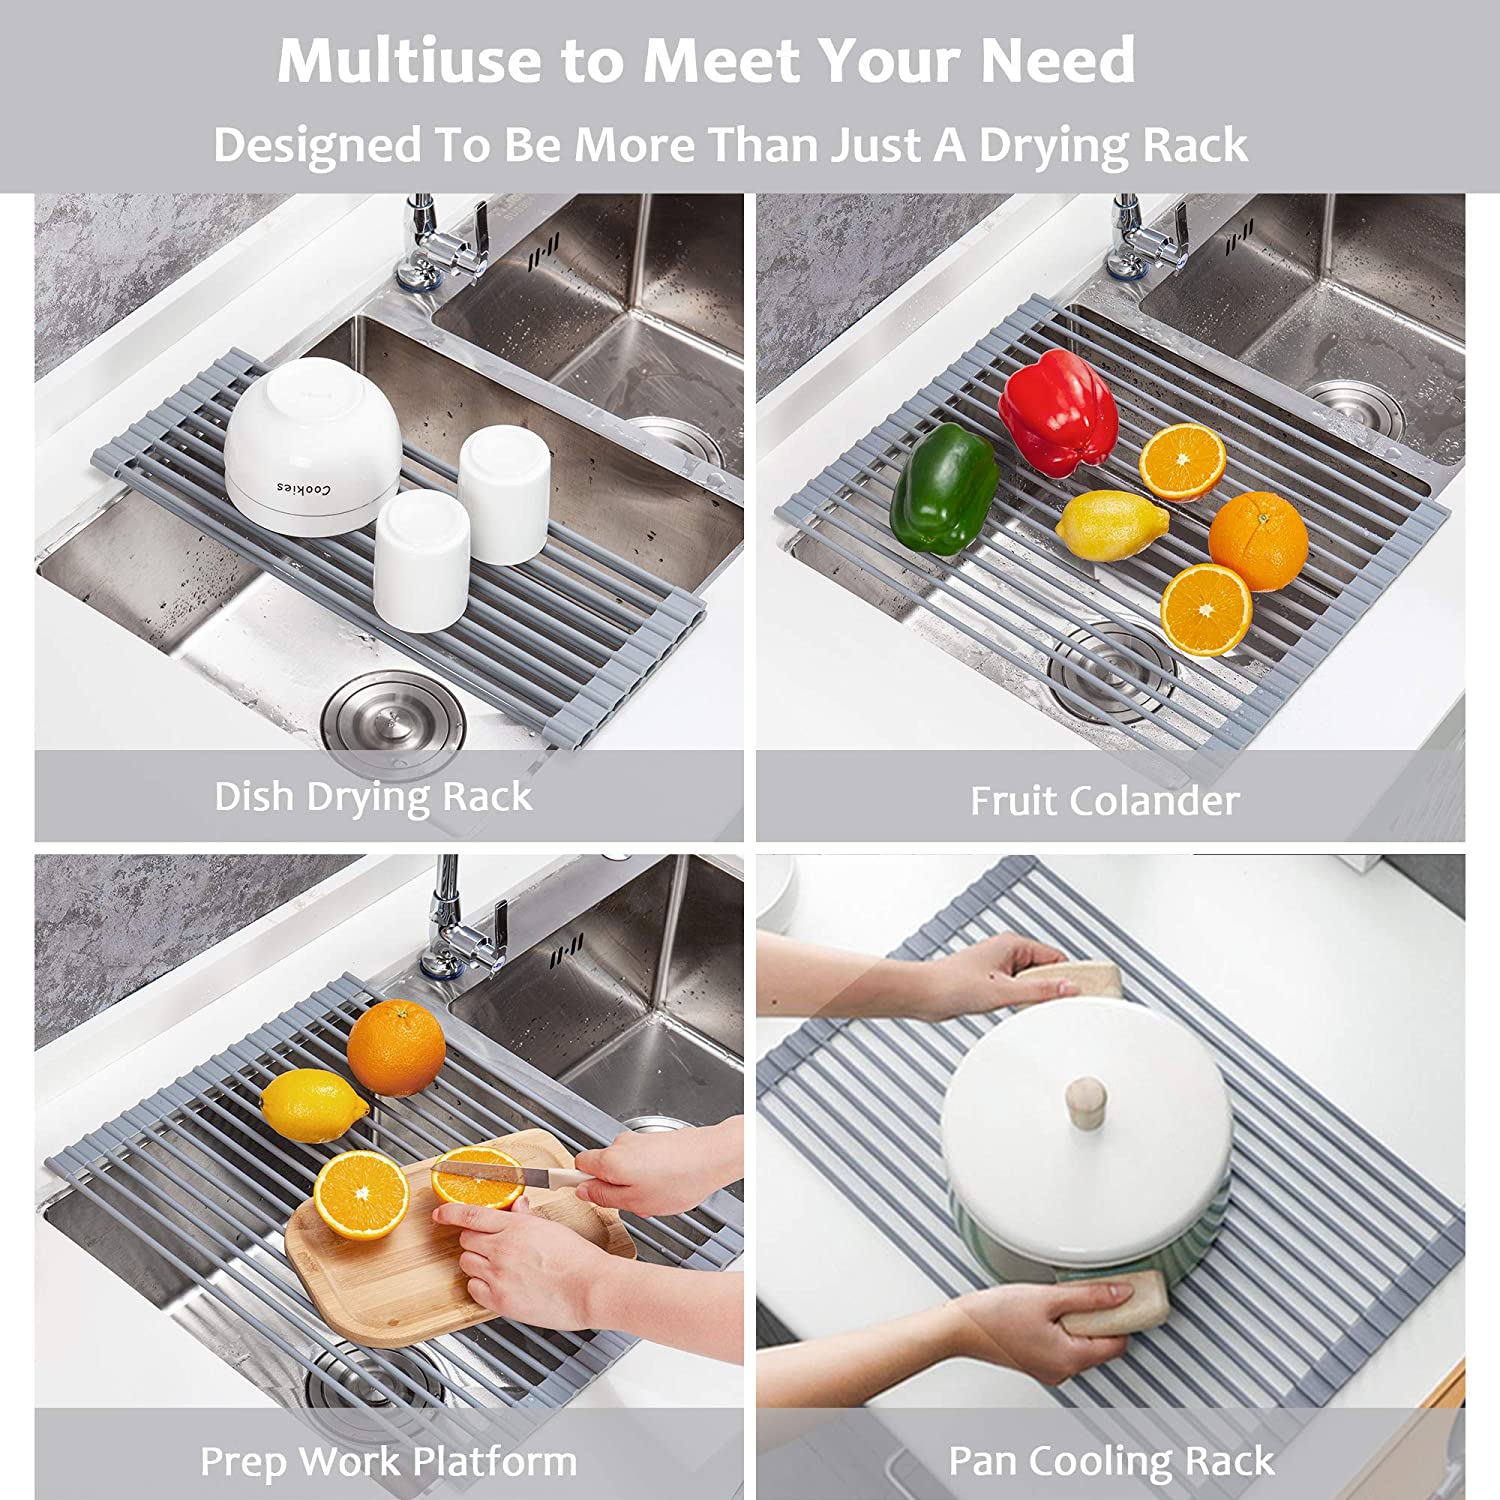 HKEEY Roll Up Dish Drying Rack, Over The Sink Dish Rack Foldable,  Heat-Resistant, Anti-Slip Silicone Coated Steel Dish Drainer for Kitchen  Sink